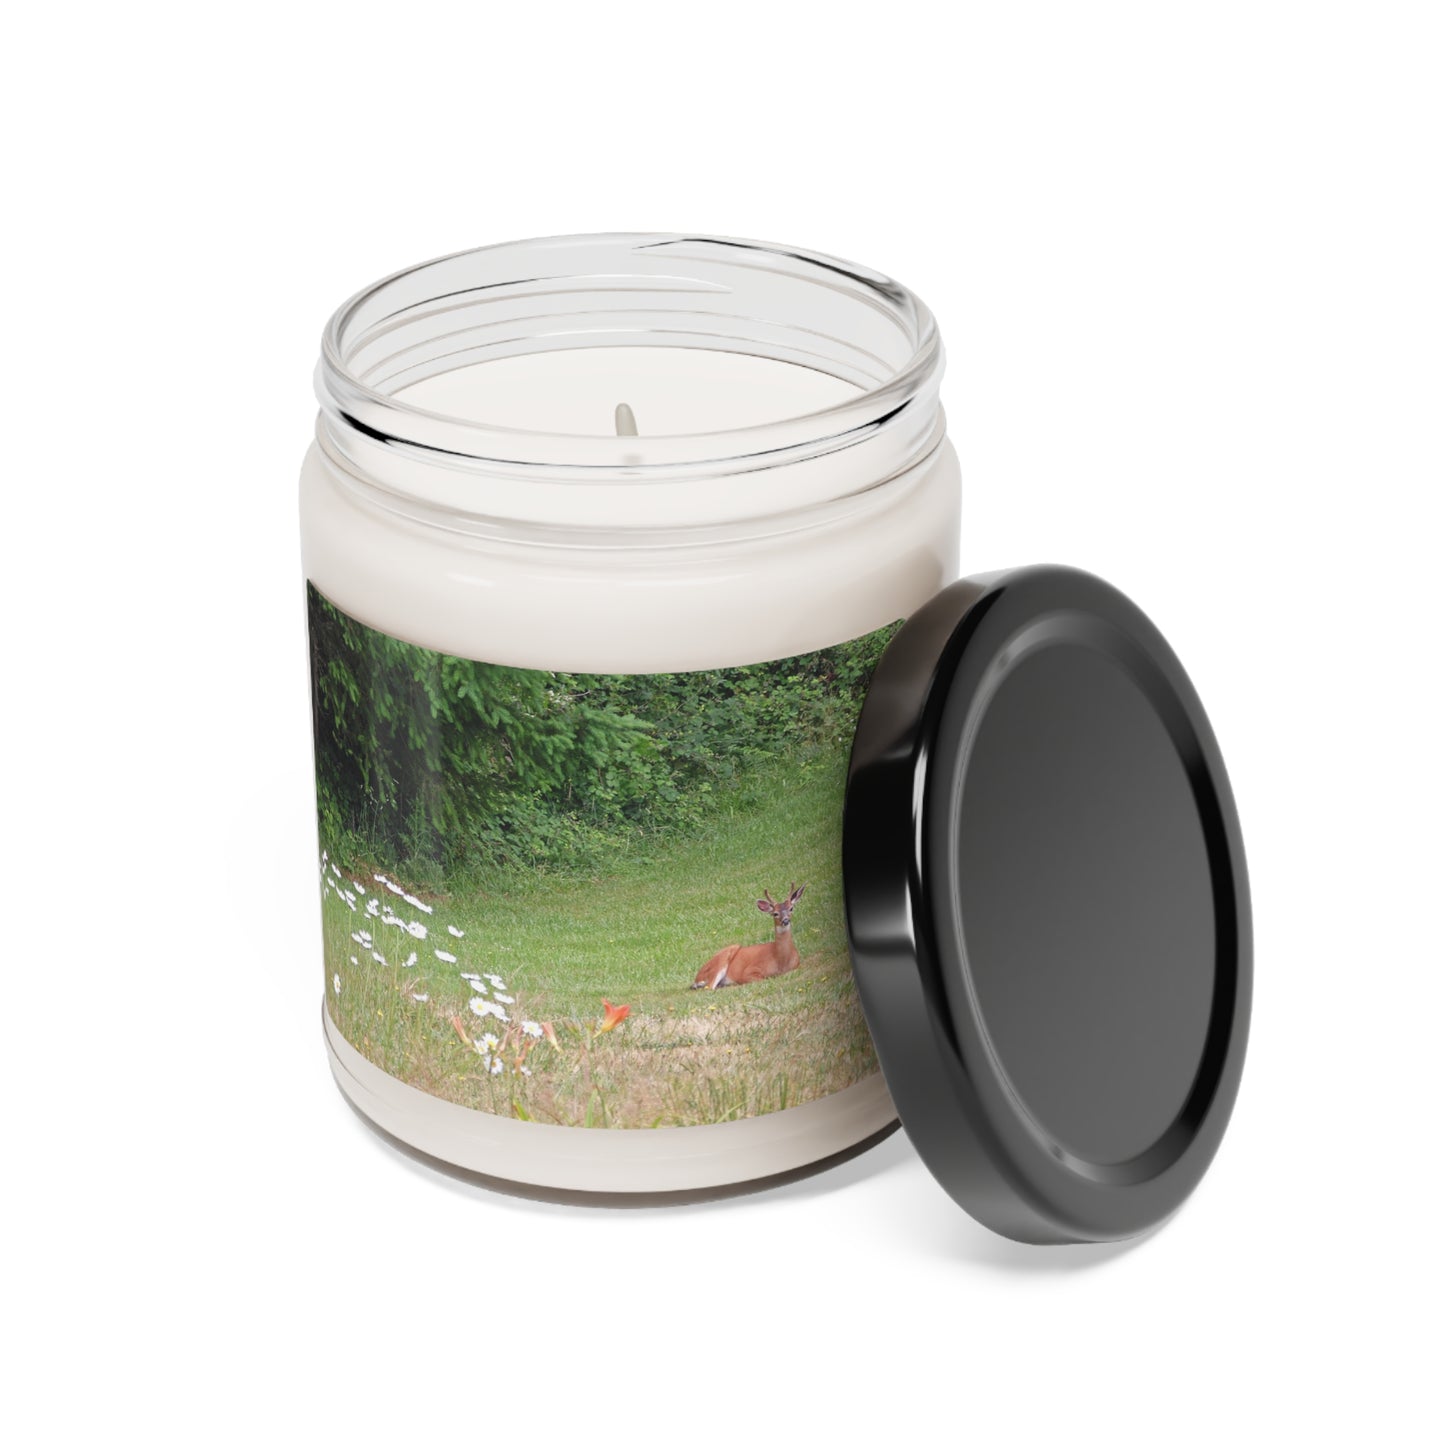 Peace In The Meadow Scented Soy Candle, 9oz